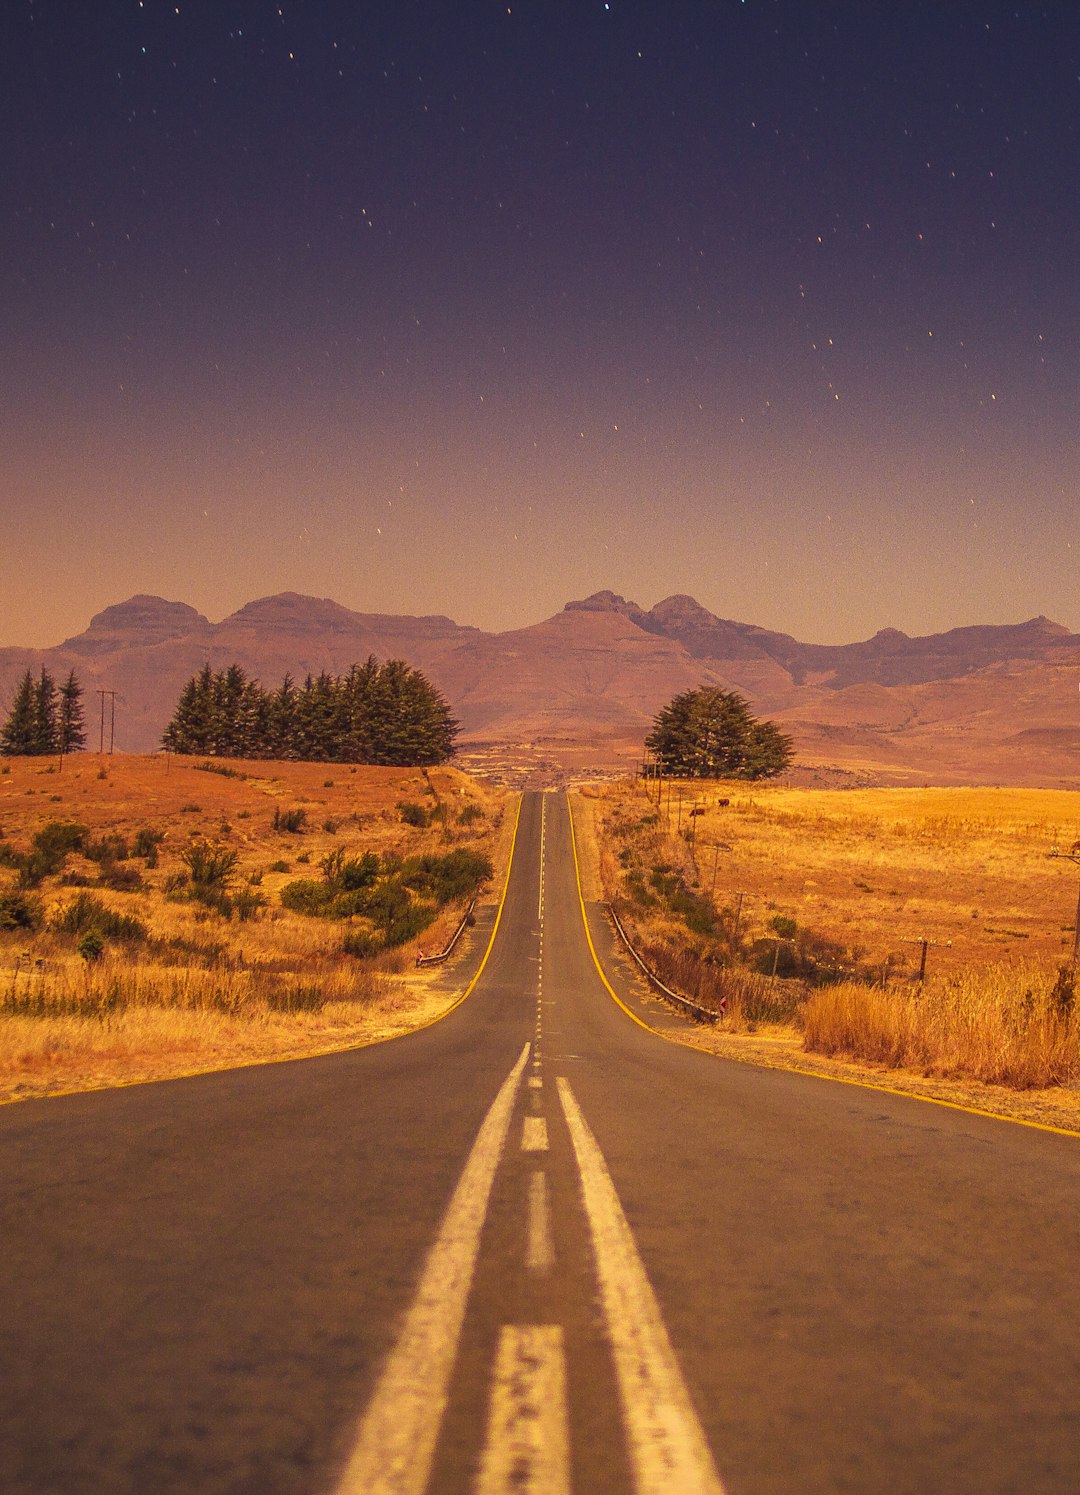 travelers stories about Road trip in Clarens, South Africa